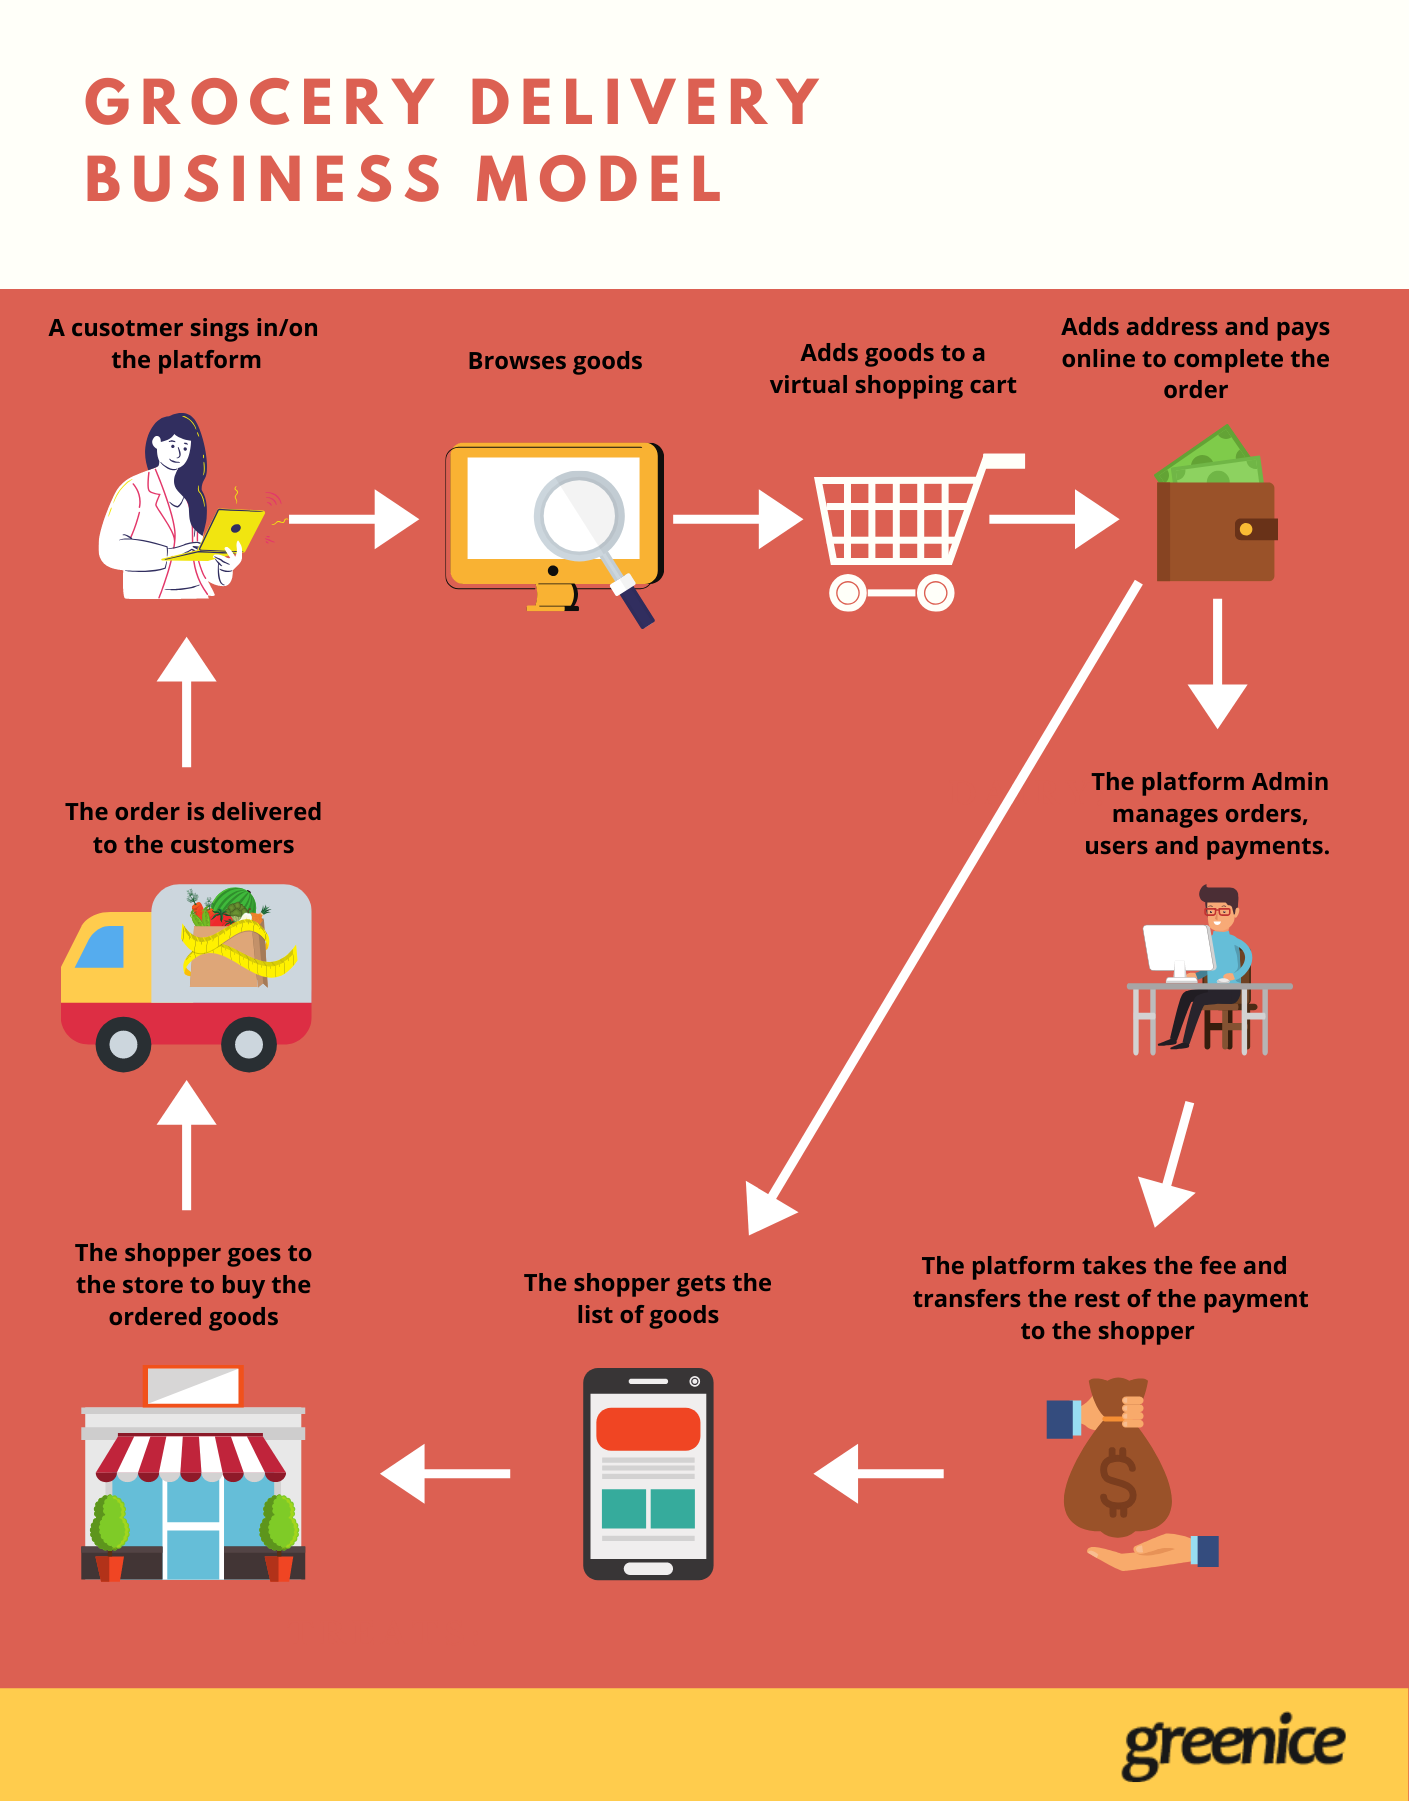 Food delivery business model